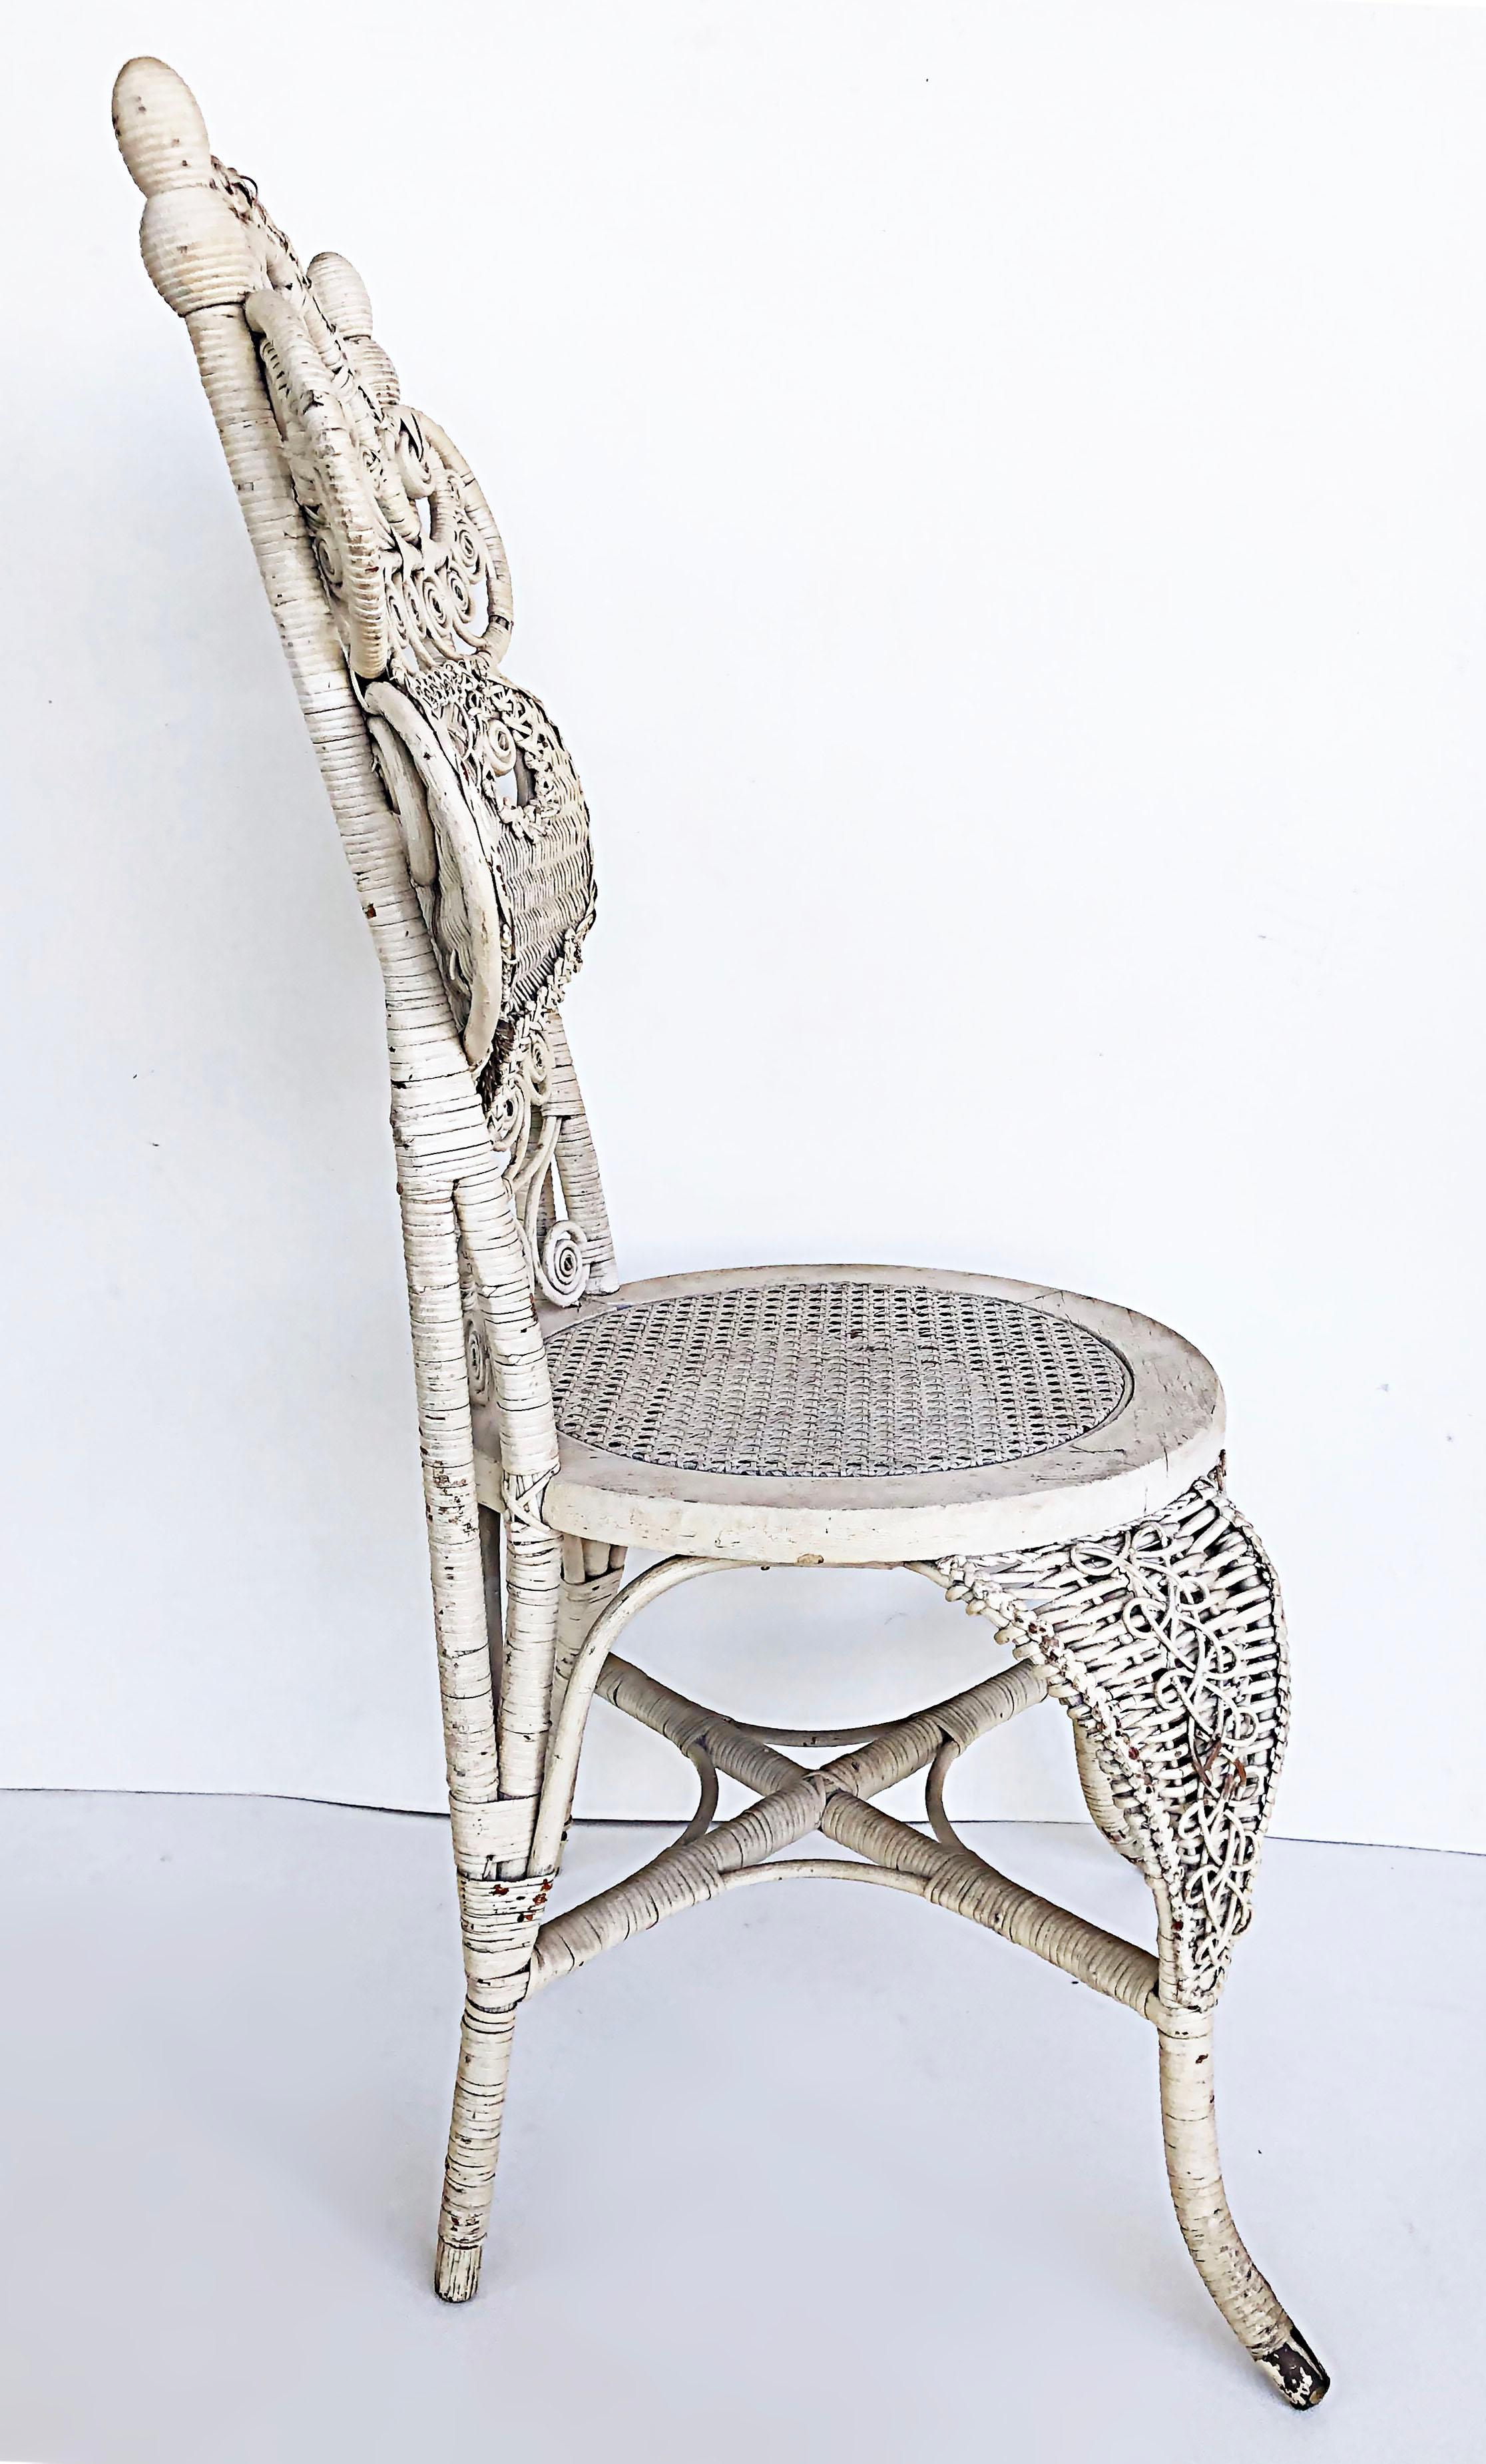 20th Century Ornate White Painted Late Victorian Wicker Chair For Sale